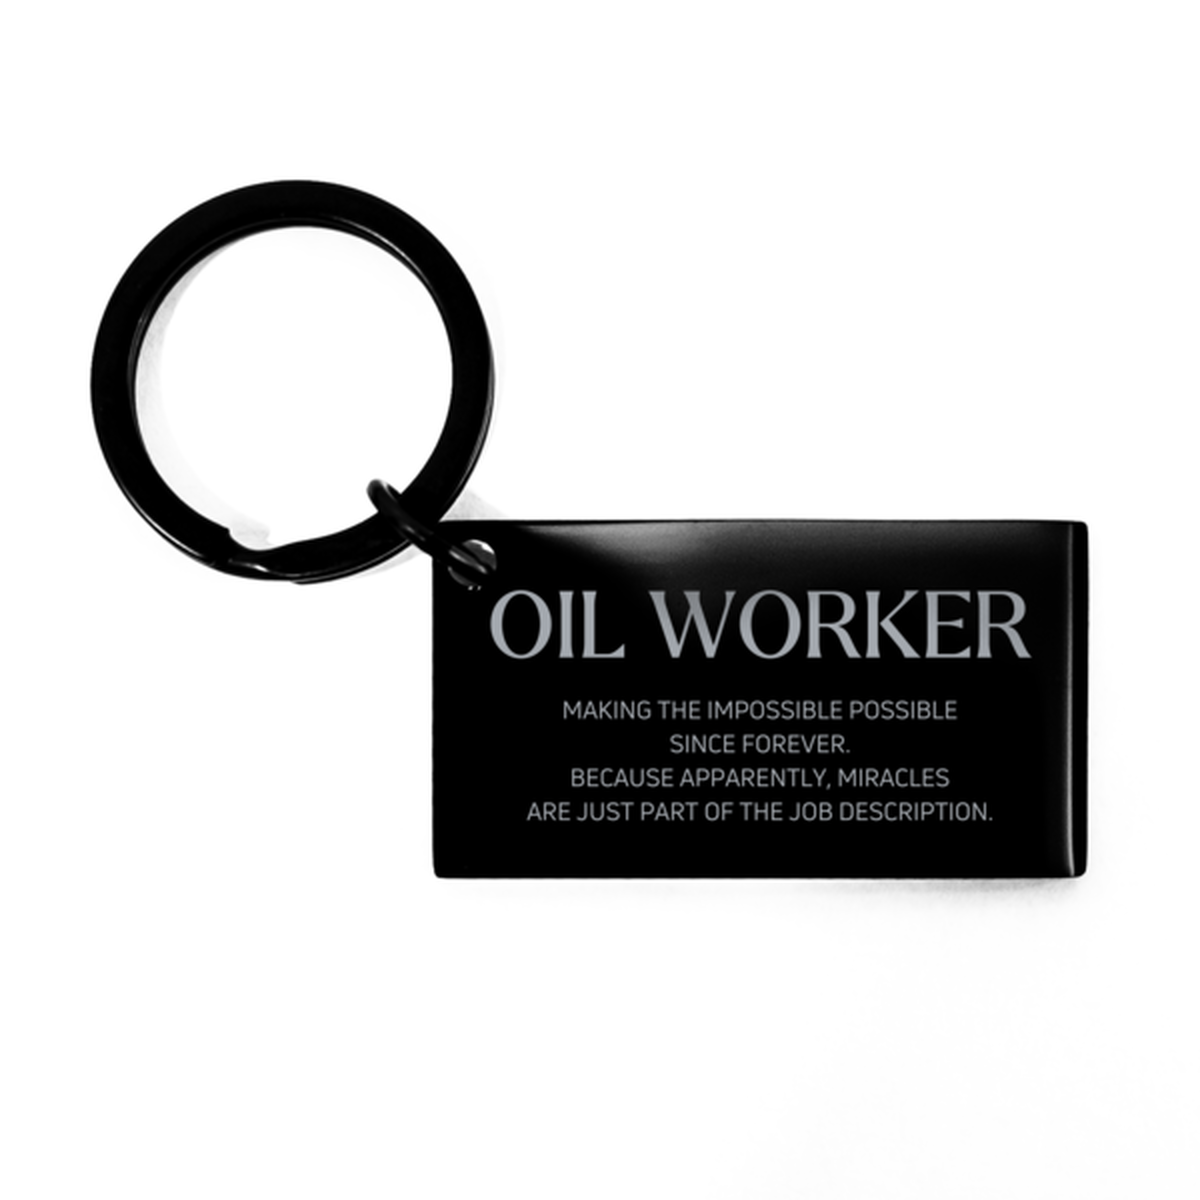 Funny Oil Worker Gifts, Miracles are just part of the job description, Inspirational Birthday Keychain For Oil Worker, Men, Women, Coworkers, Friends, Boss